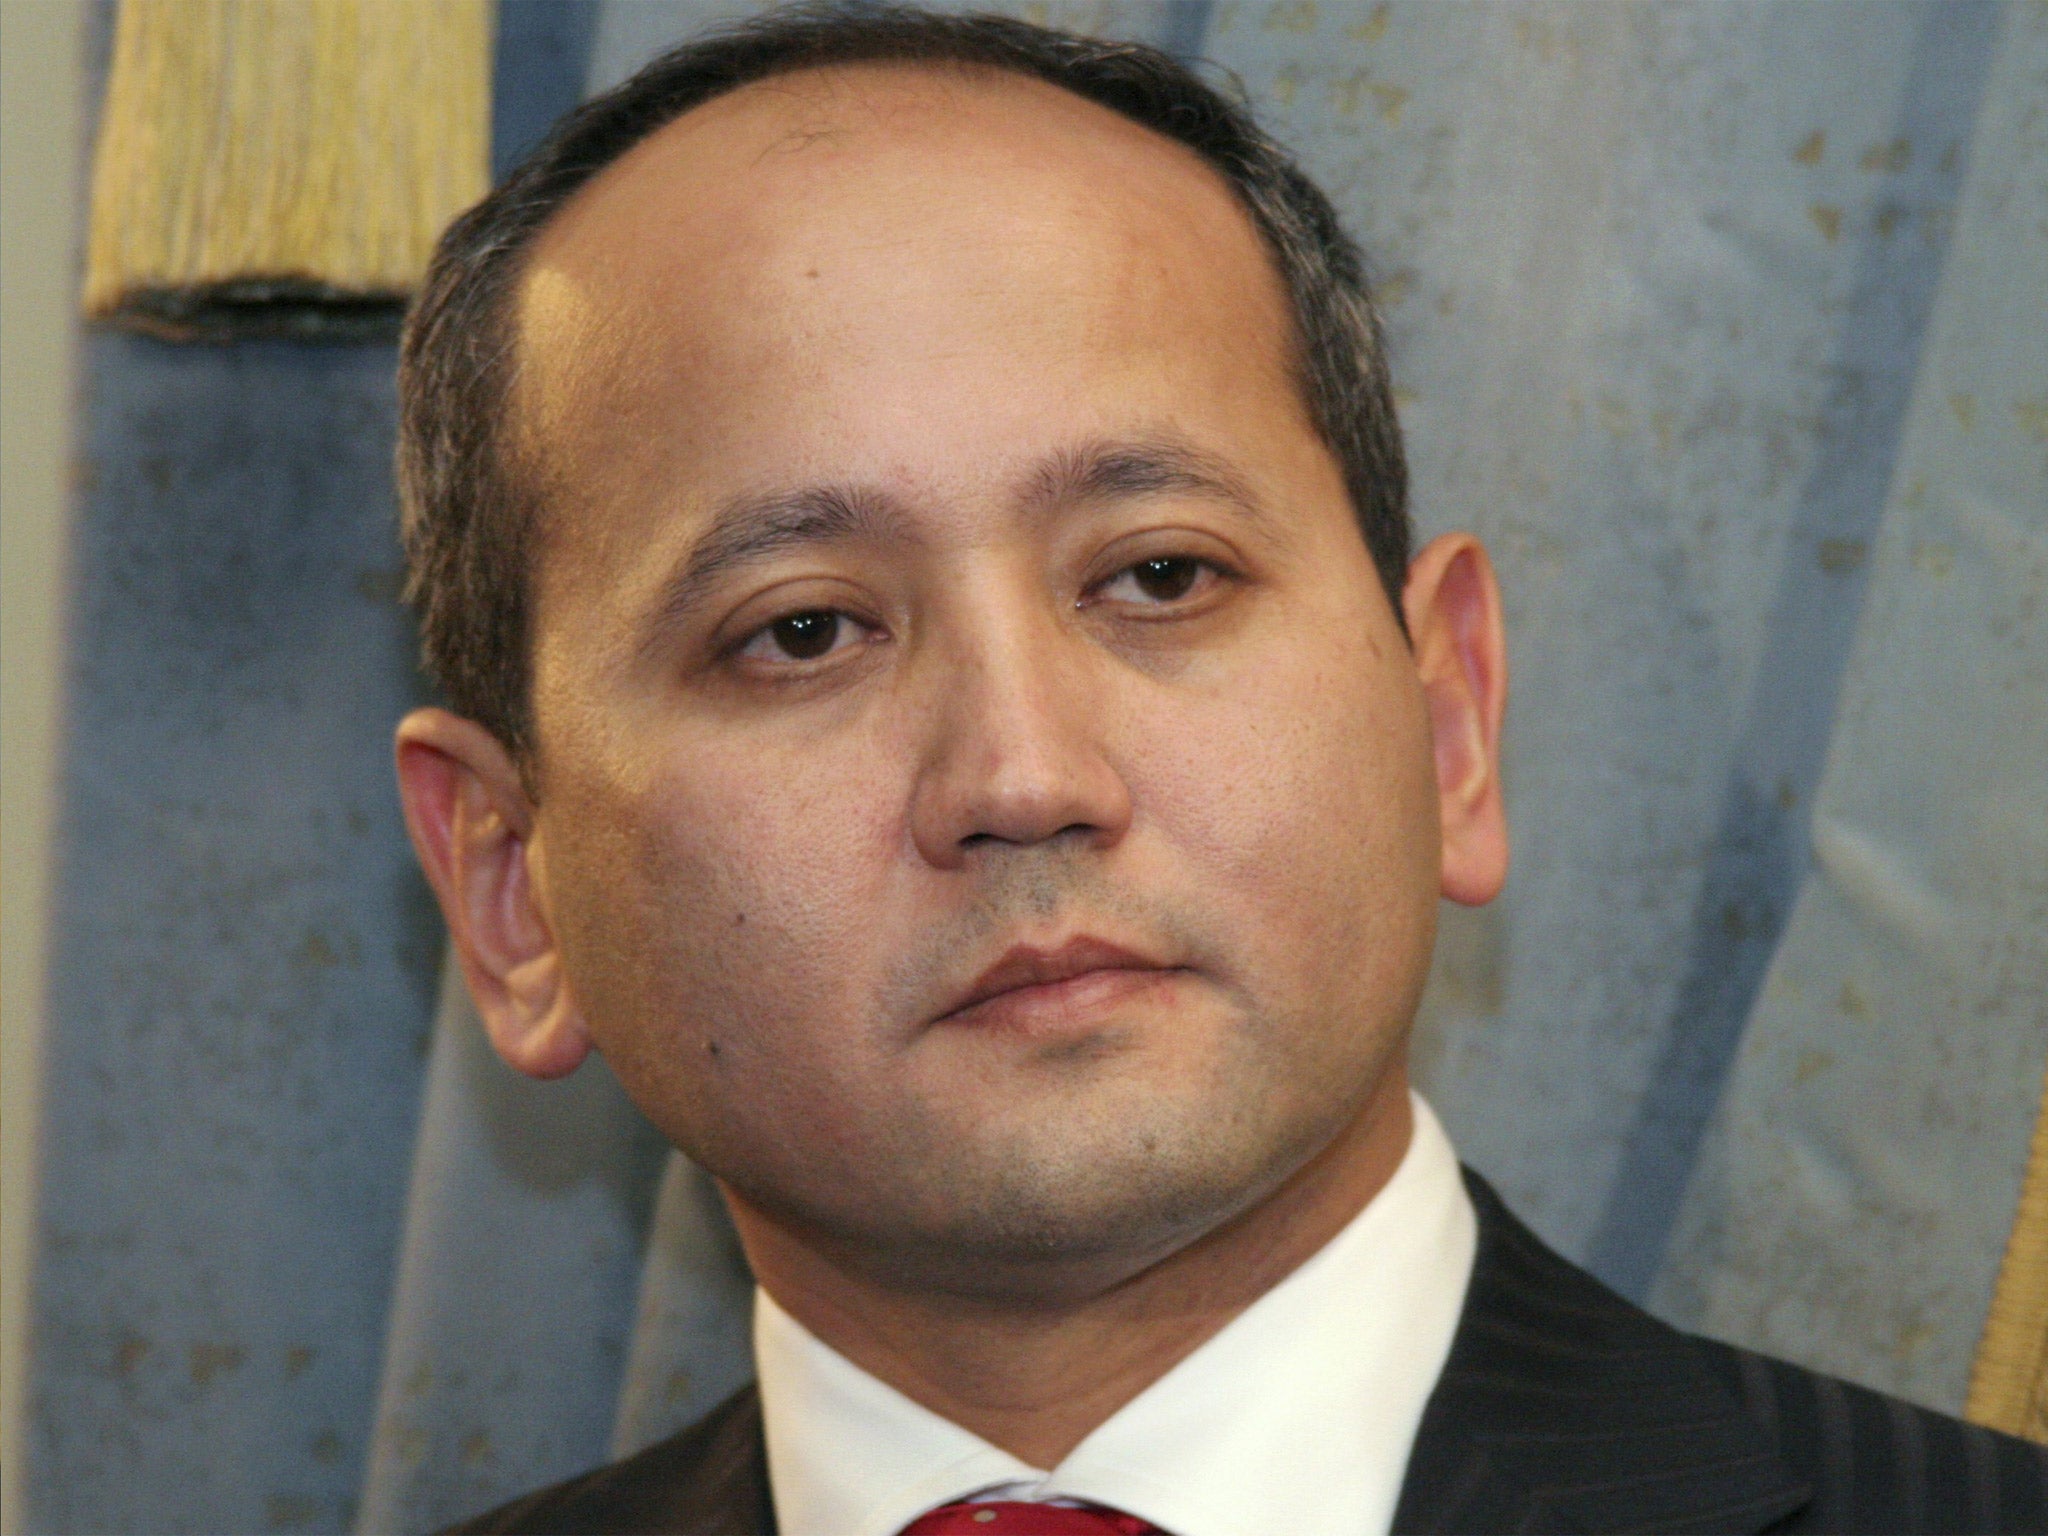 Mukhtar Ablyazov, a Kazakh businessman, has been accused of one of the world’s biggest frauds